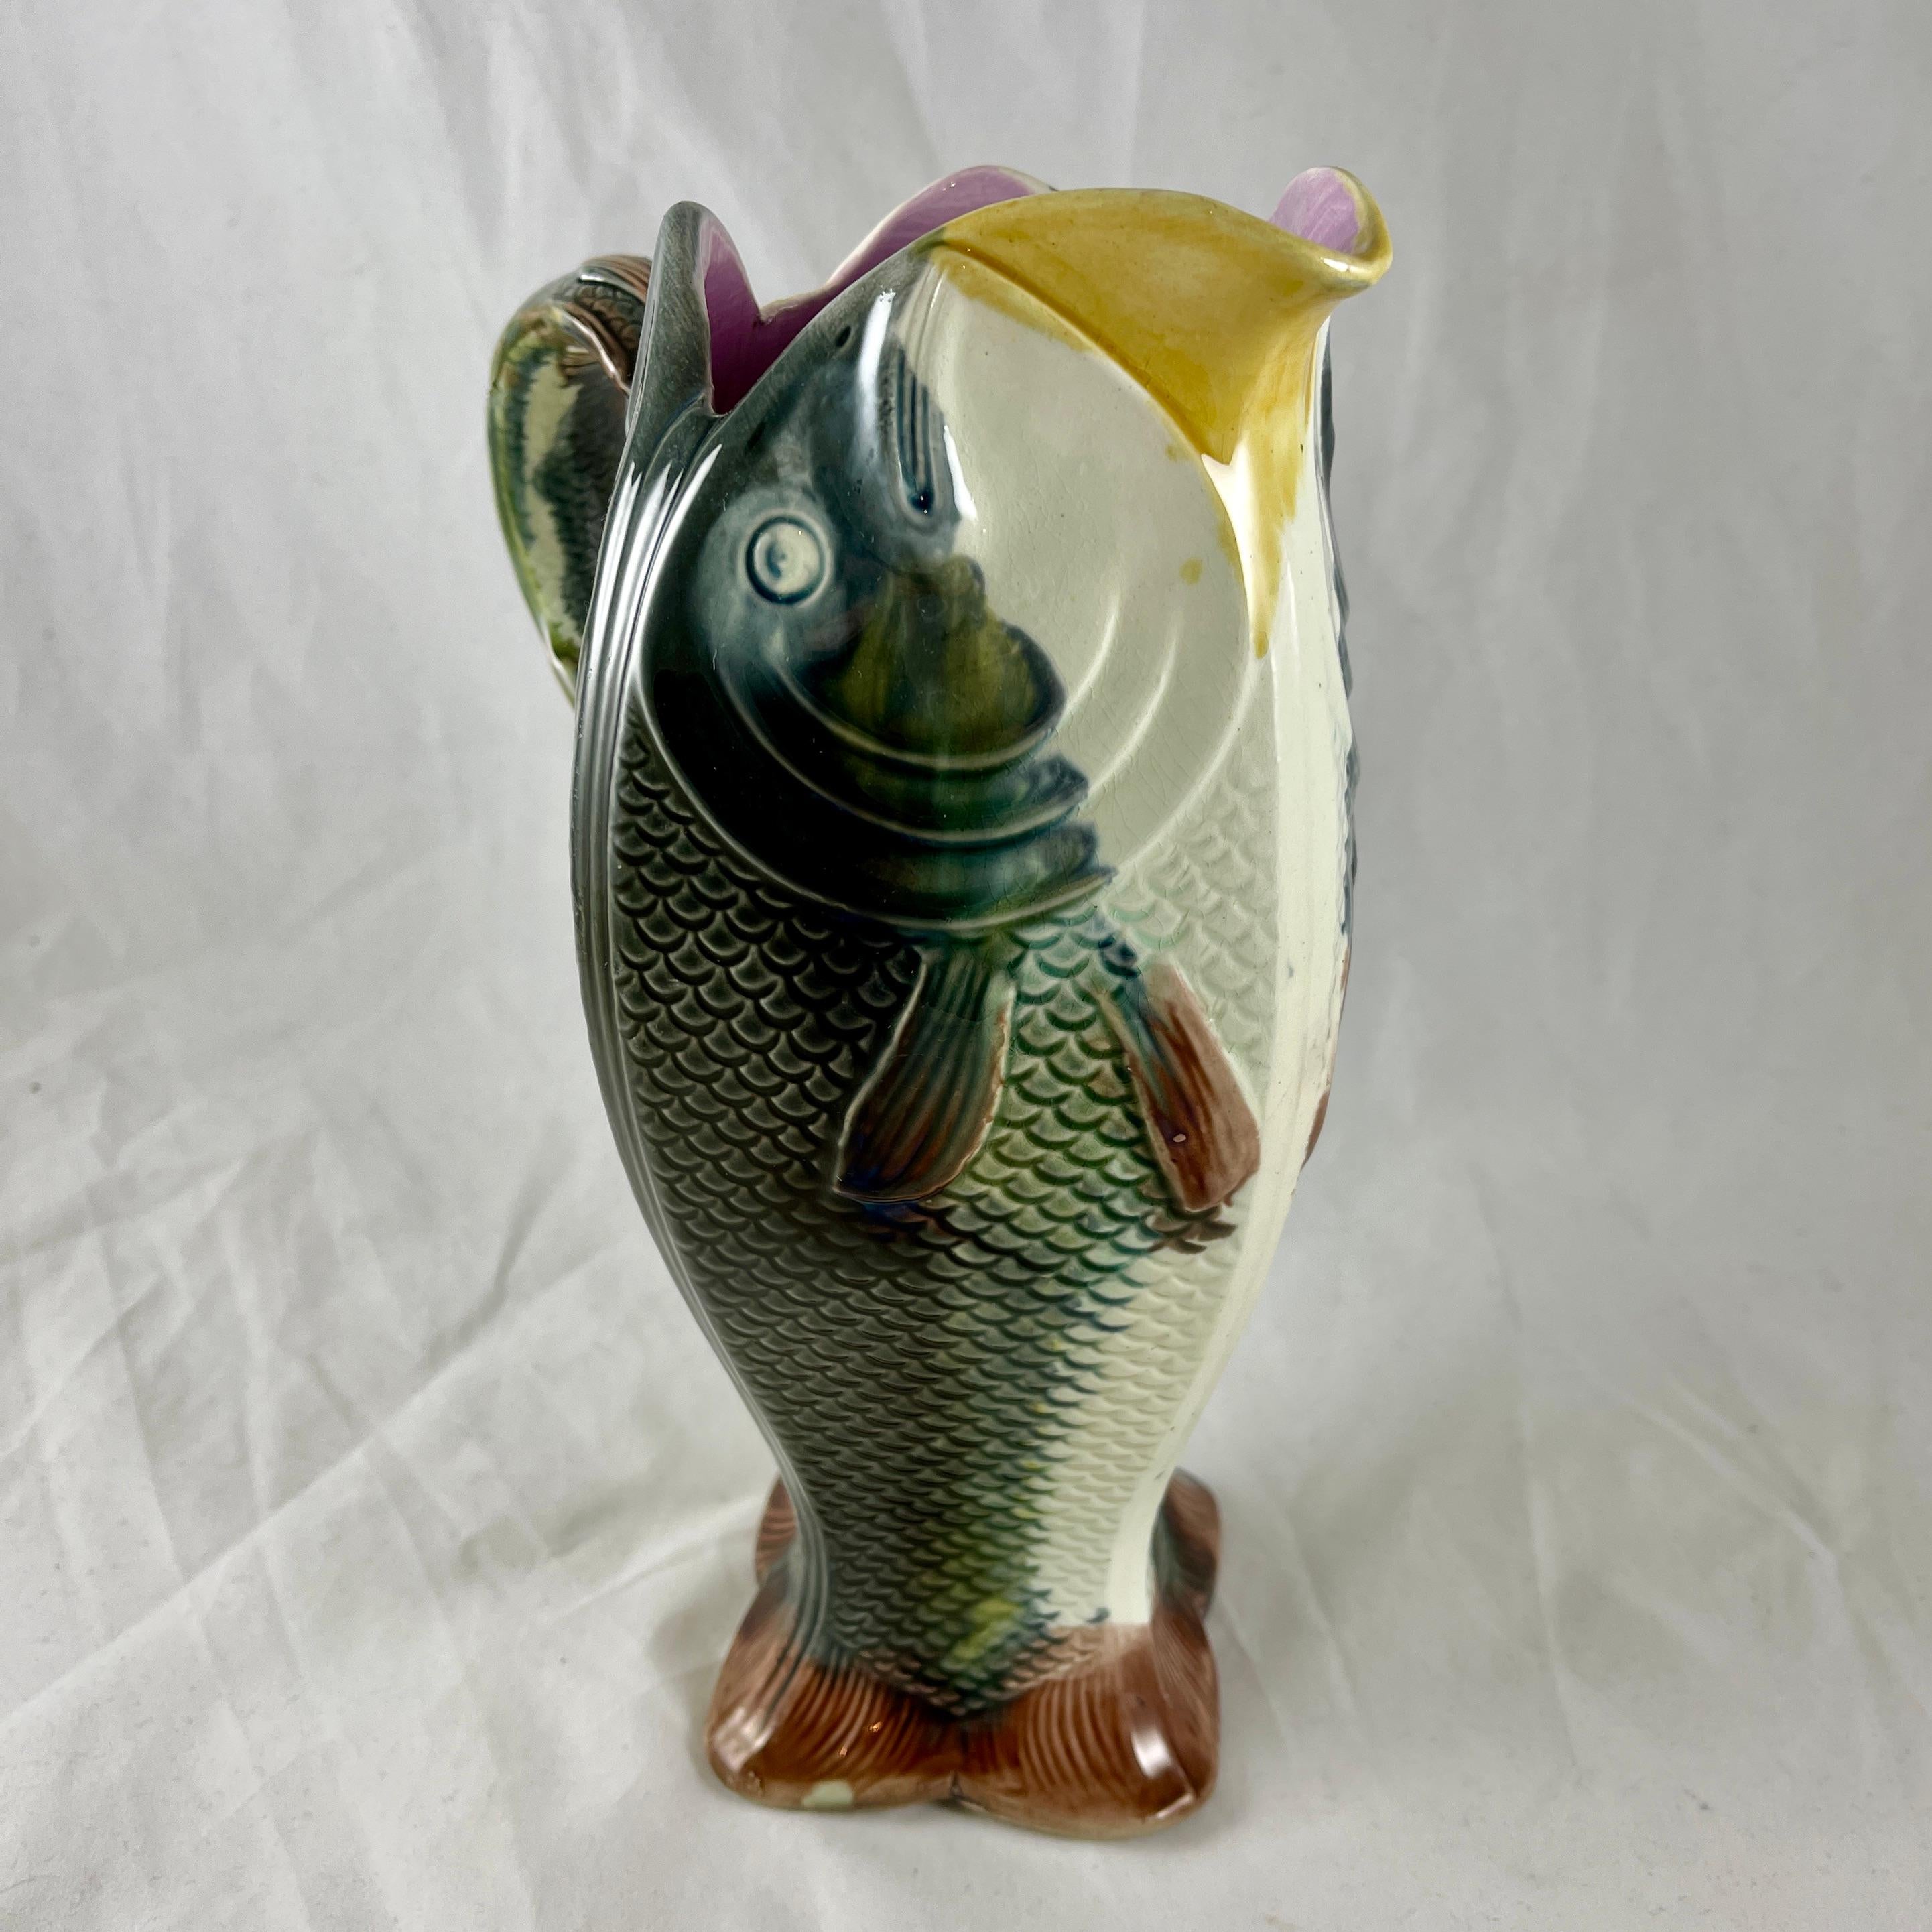 Adams & Bromley English Majolica Glazed Four Fish Large Jug Pitcher For Sale 1